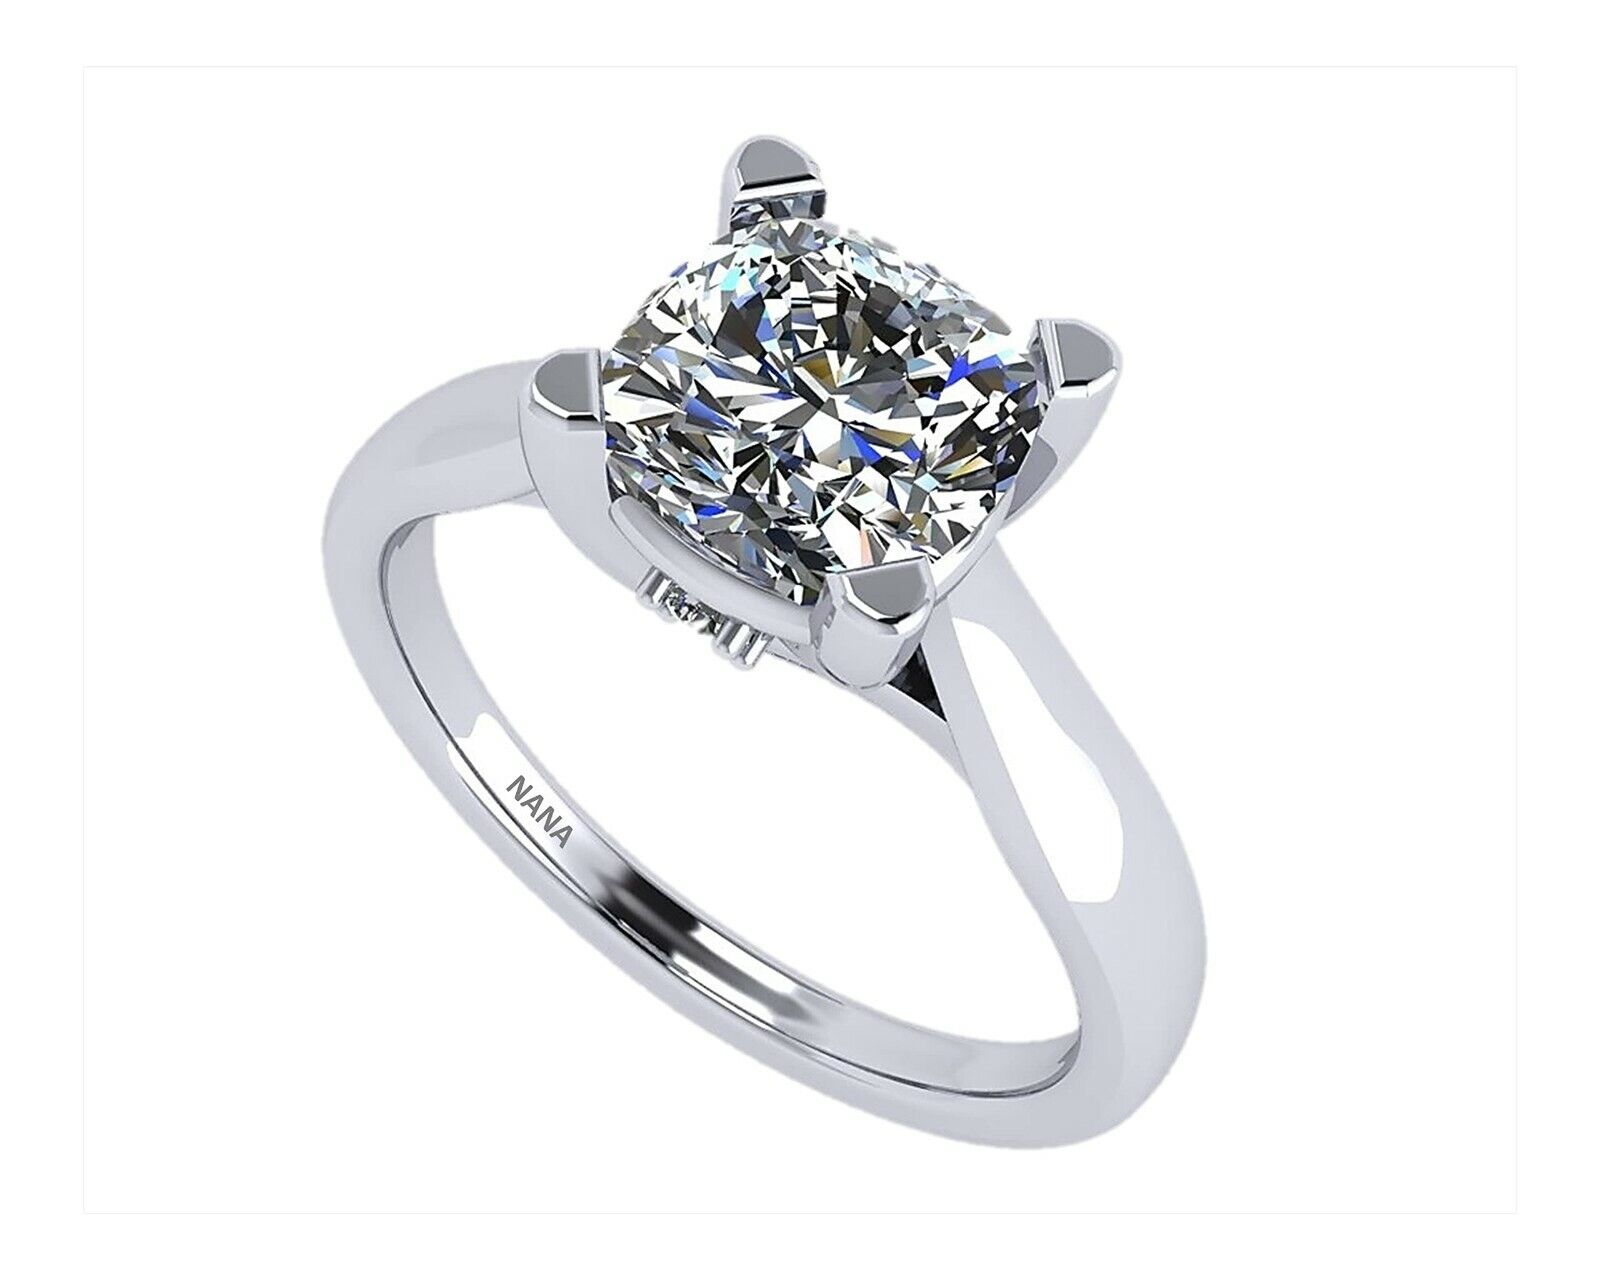  "Shine brighter than ever with the NANA Jewels Cushion Cut CZ Lucita Cubic Zirconia Engagement Ring!